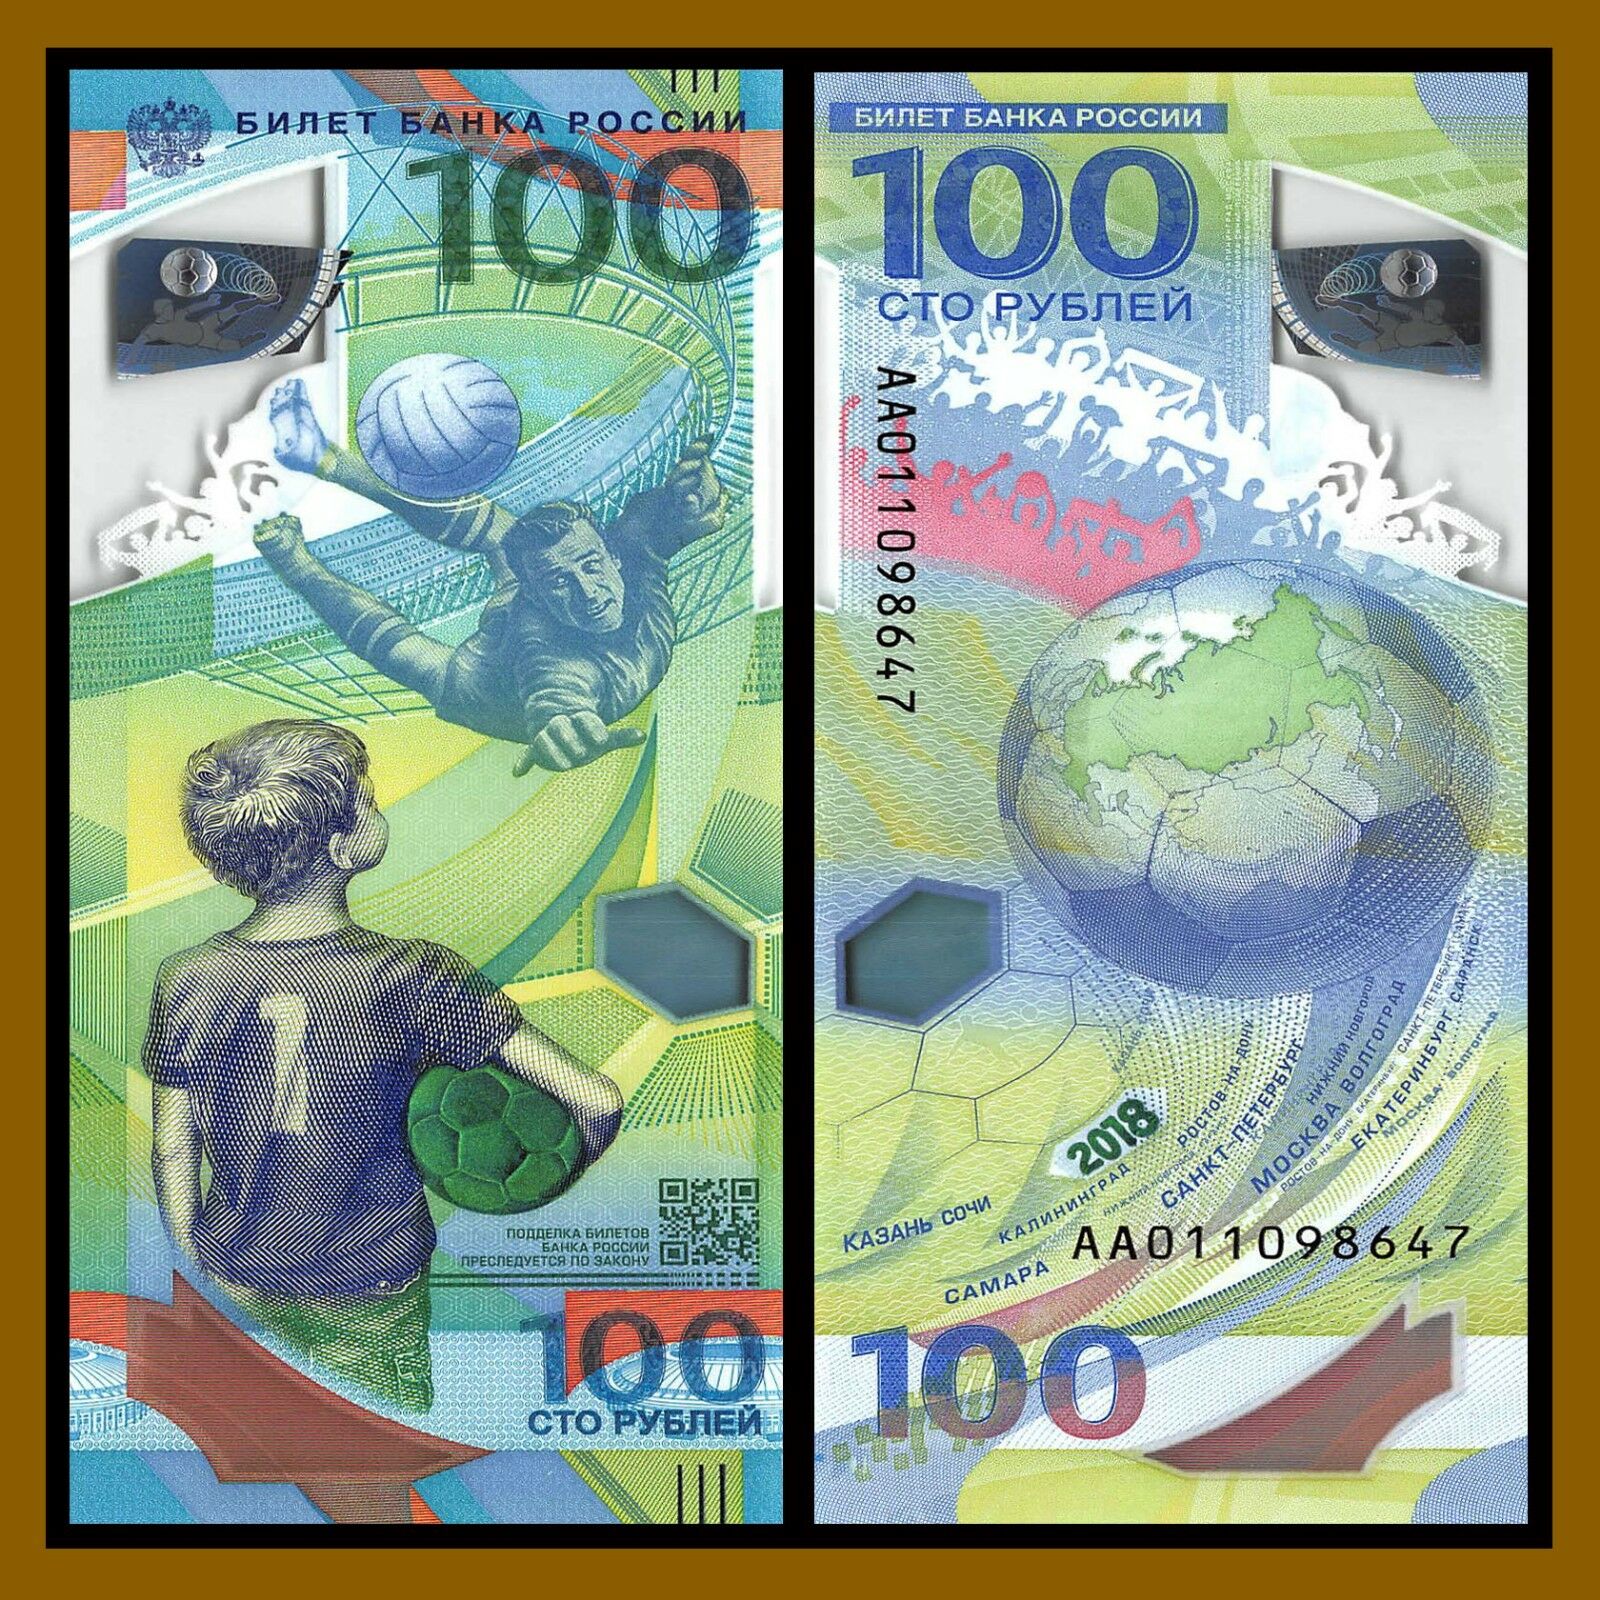 Russia 100 Rubles, 2018 Fifa World Cup Soccer Football P-280 New Polymer Unc